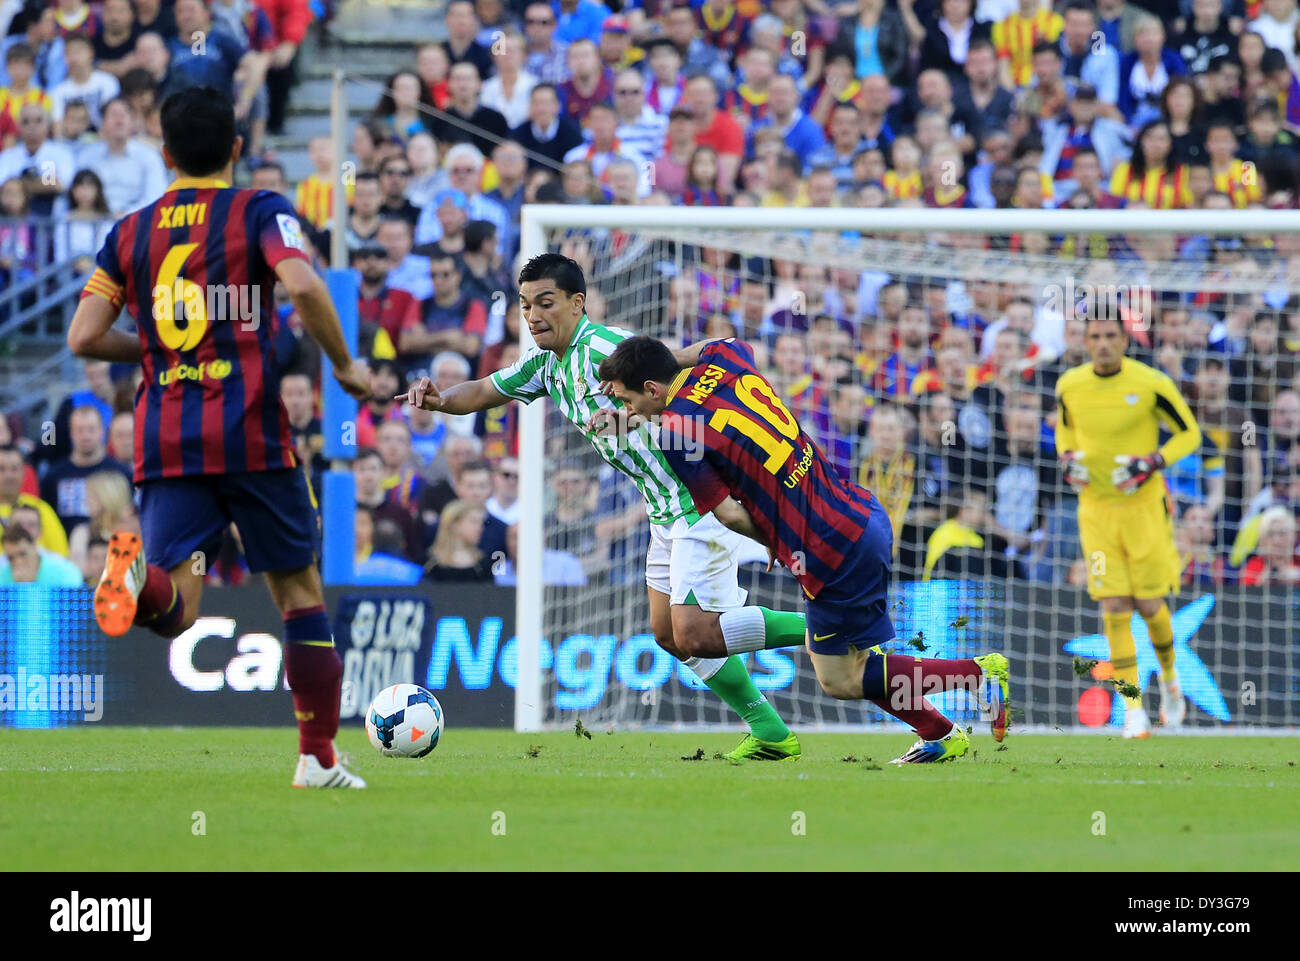 Barcelona, Spain. 5th Apr, 2014. Leo Messi in the match between FC Barcelona and Betis for the week 32 of the spanish league, played at the Camp Nou on 5 april, 2014. Photo: Joan Valls/Urbanandsport/Nurphoto. © Joan Valls/NurPhoto/ZUMAPRESS.com/Alamy Live News Stock Photo